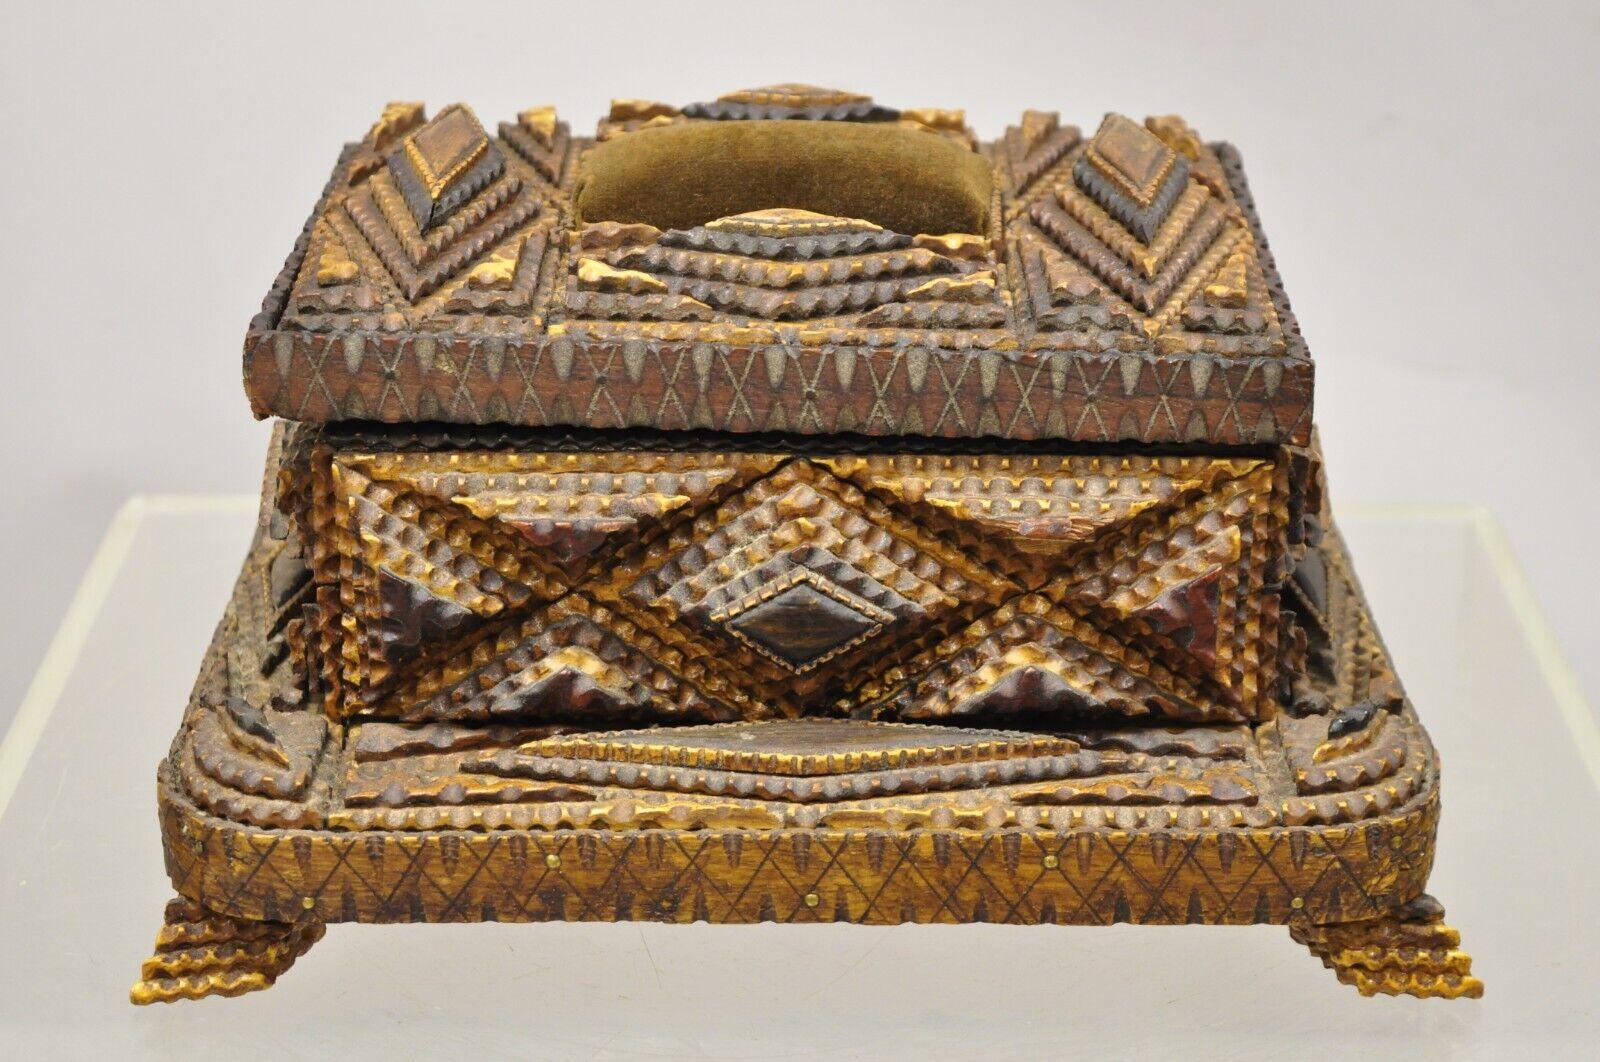 Antique Tramp Art Diamond 2 Tier Hinged Wood Jewelry Presentation Box. Item features stunning work and carving, hinged lid with interior mirror, mohair upholstered padded lid, upholstered interior, very nice antique item. Circa Early 1900s.